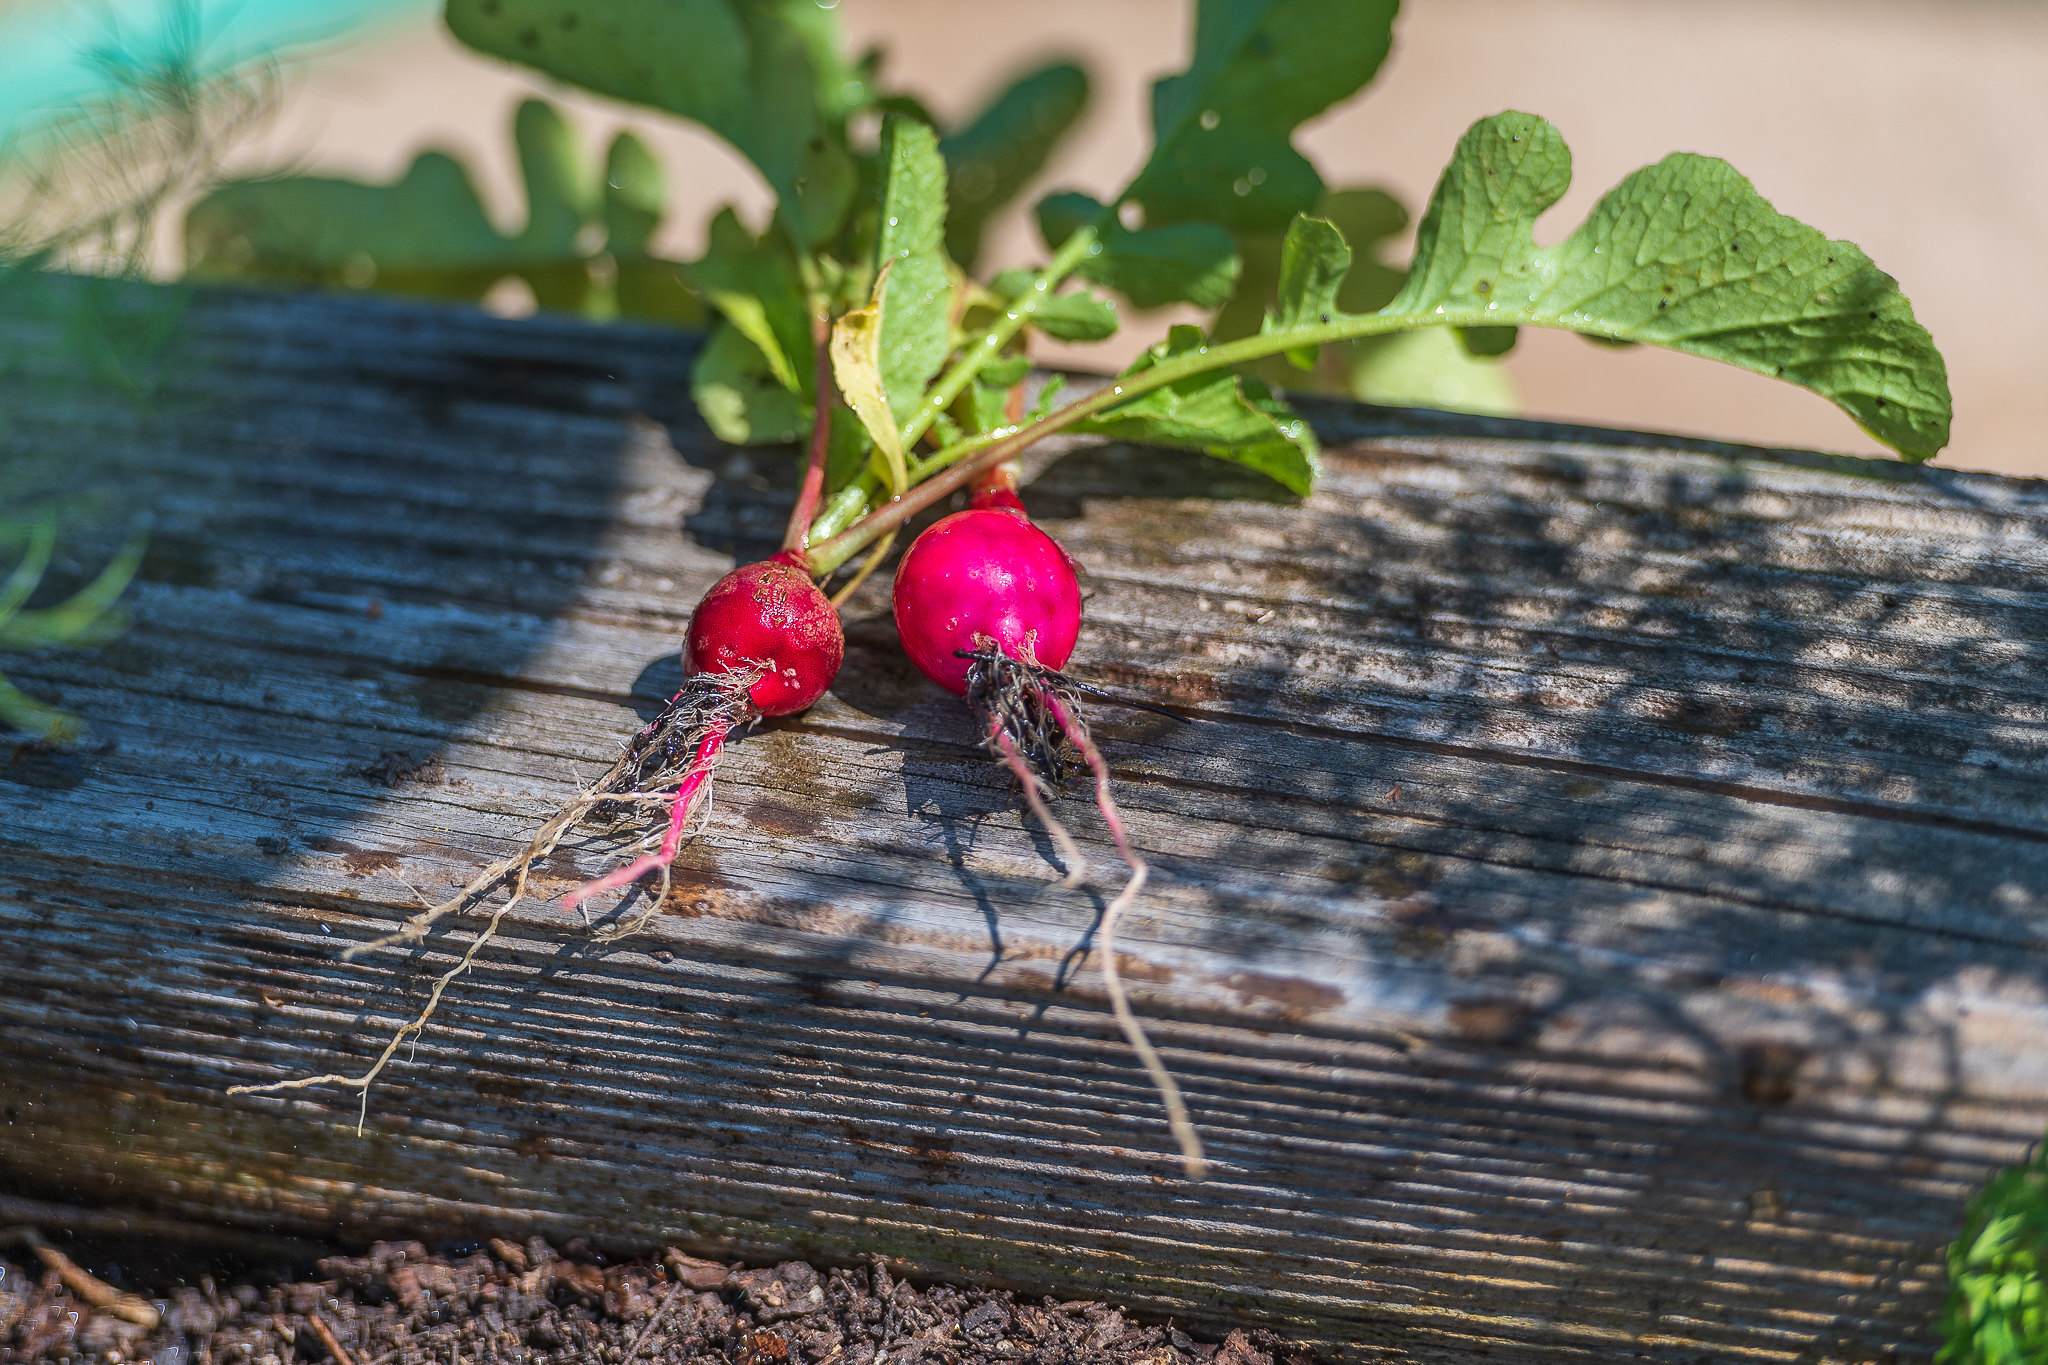 Small red radishes laying on a wooden beam